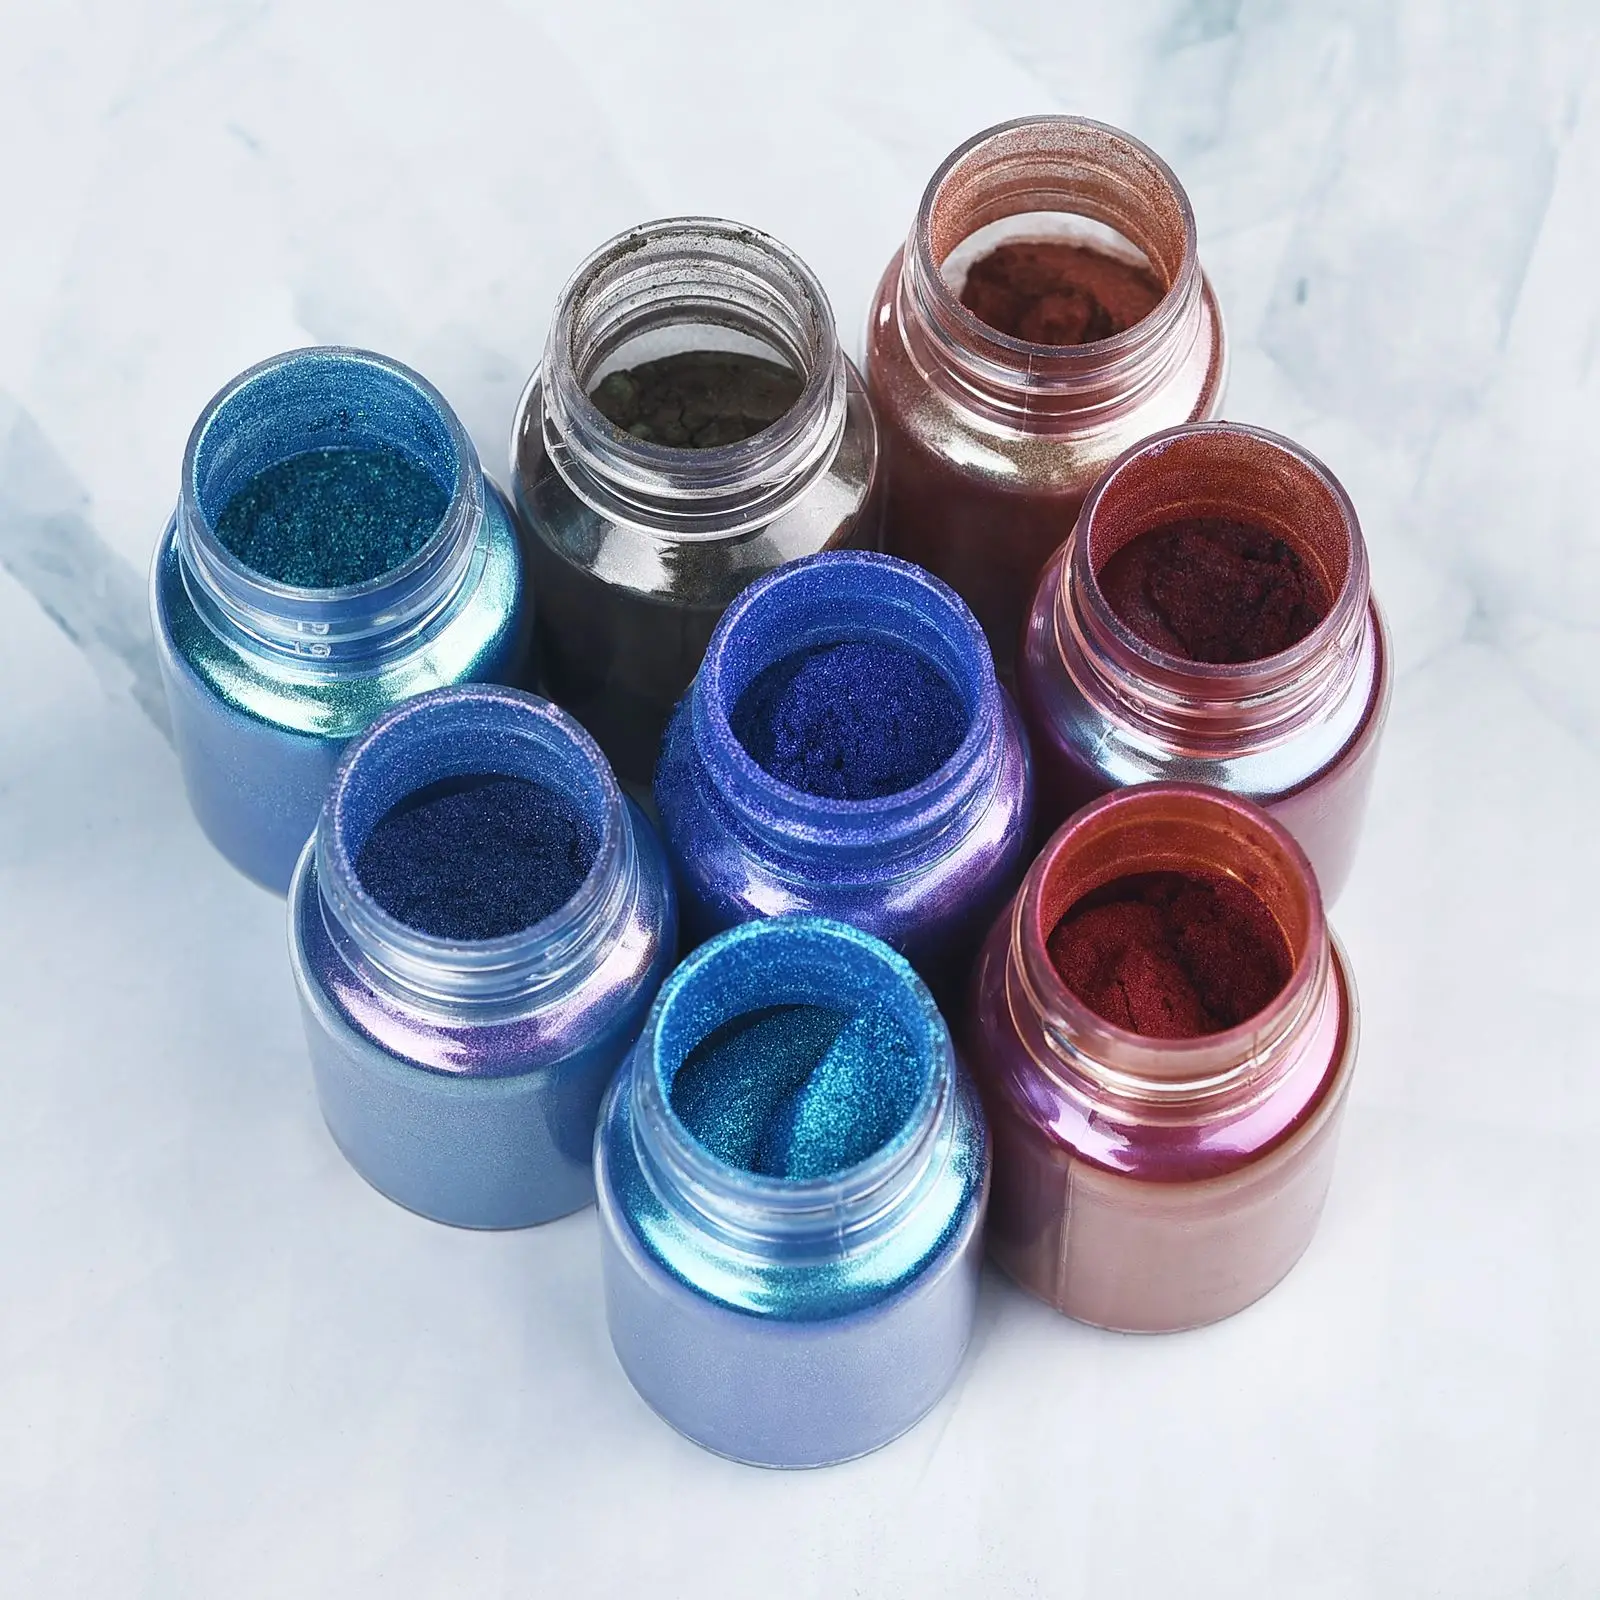 Mirror Chameleons Powder Resin Pigment Glitter Magic Discolored Pearlescent DIY Crystal Epoxy Resin Mold Jewelry Making Dye